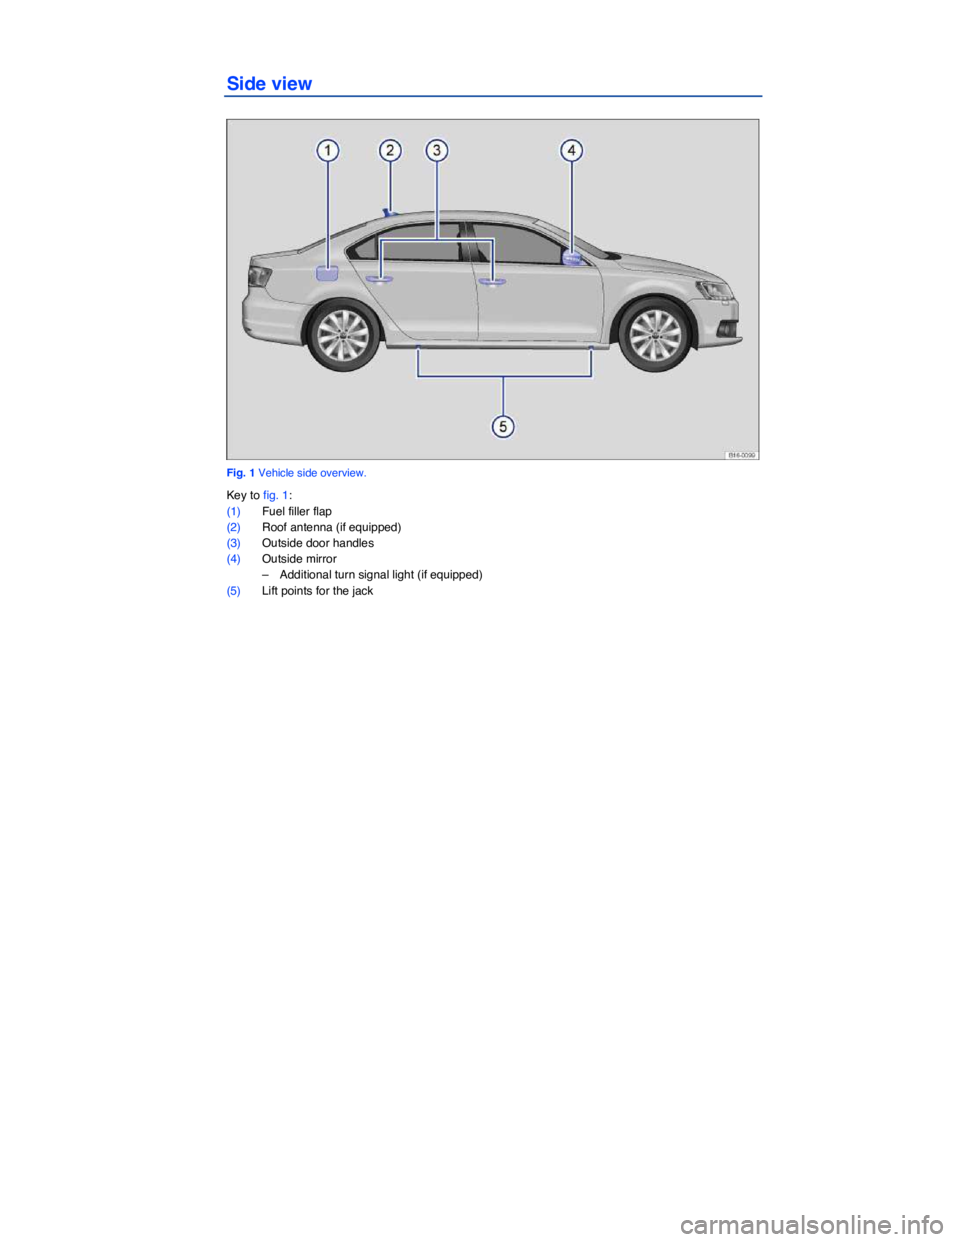 VOLKSWAGEN JETTA 1.8T SE 2014  Owners Manual  
Side view 
 
Fig. 1 Vehicle side overview. 
Key to fig. 1: 
(1) Fuel filler flap  
(2) Roof antenna (if equipped) 
(3) Outside door handles  
(4) Outside mirror  
–  Additional turn signal light (